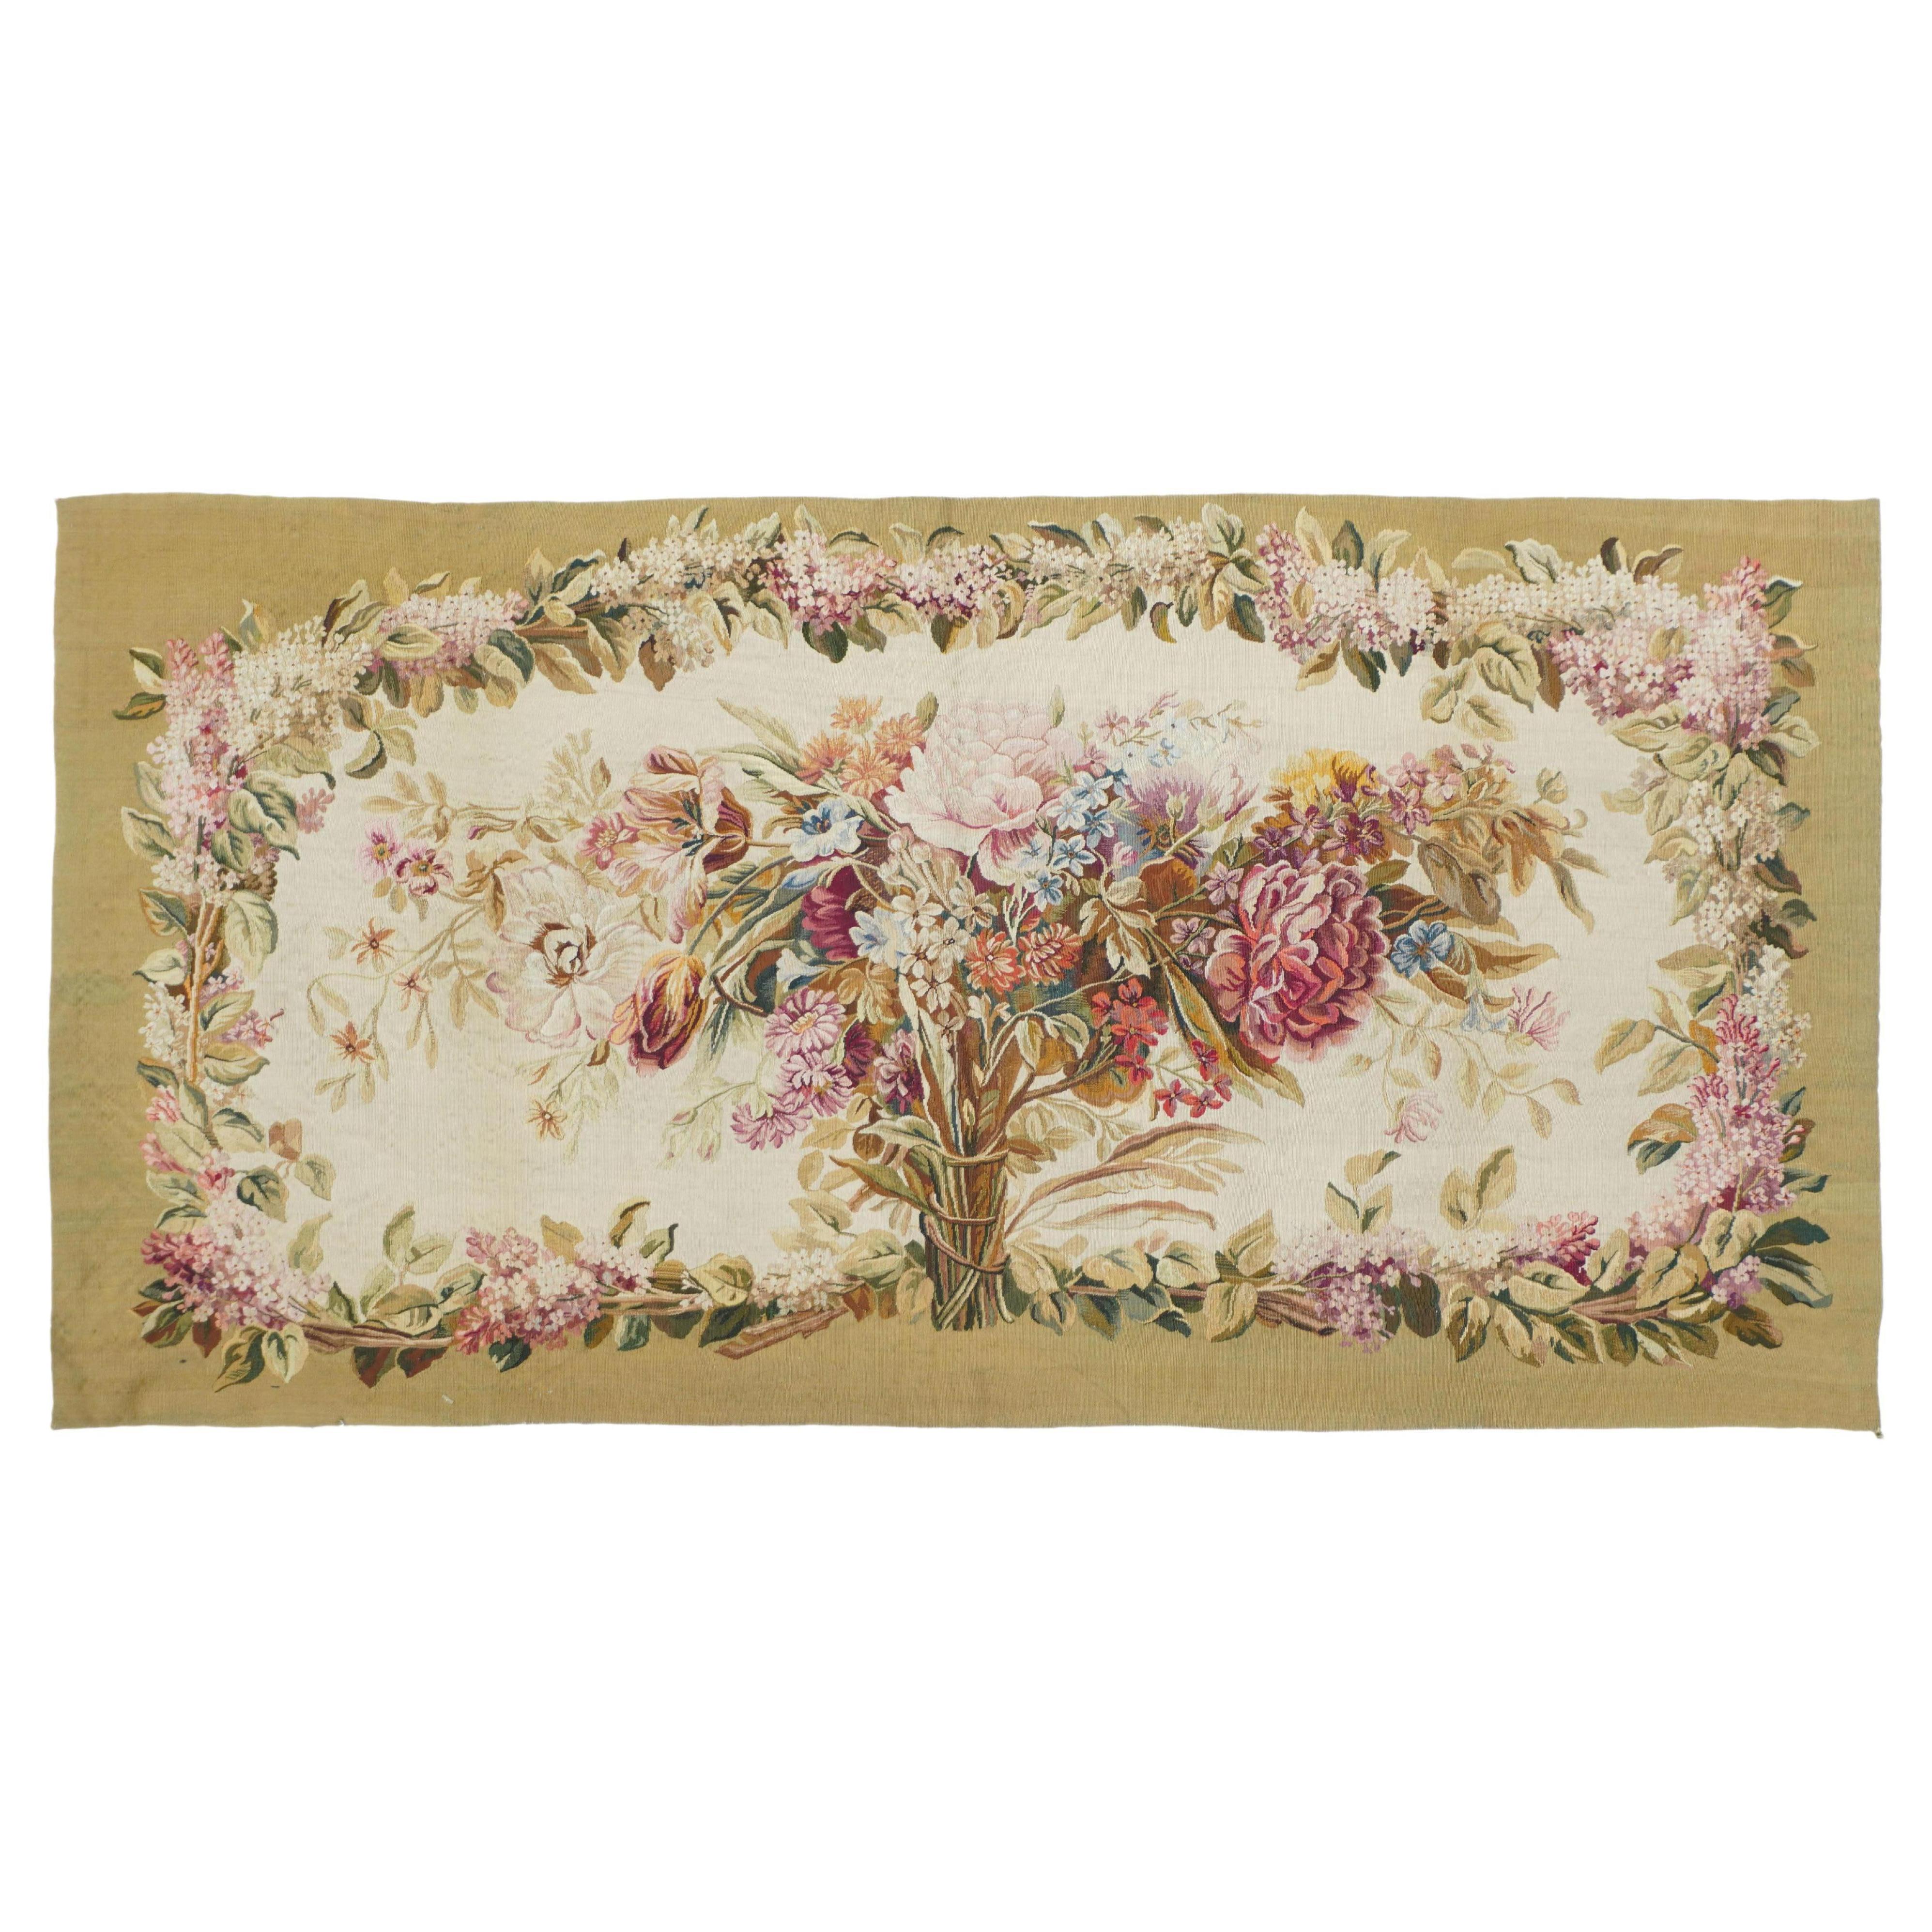 Antique Aubusson-Beauvais French Tapestry Rug 2'2'' x 4'6'' For Sale